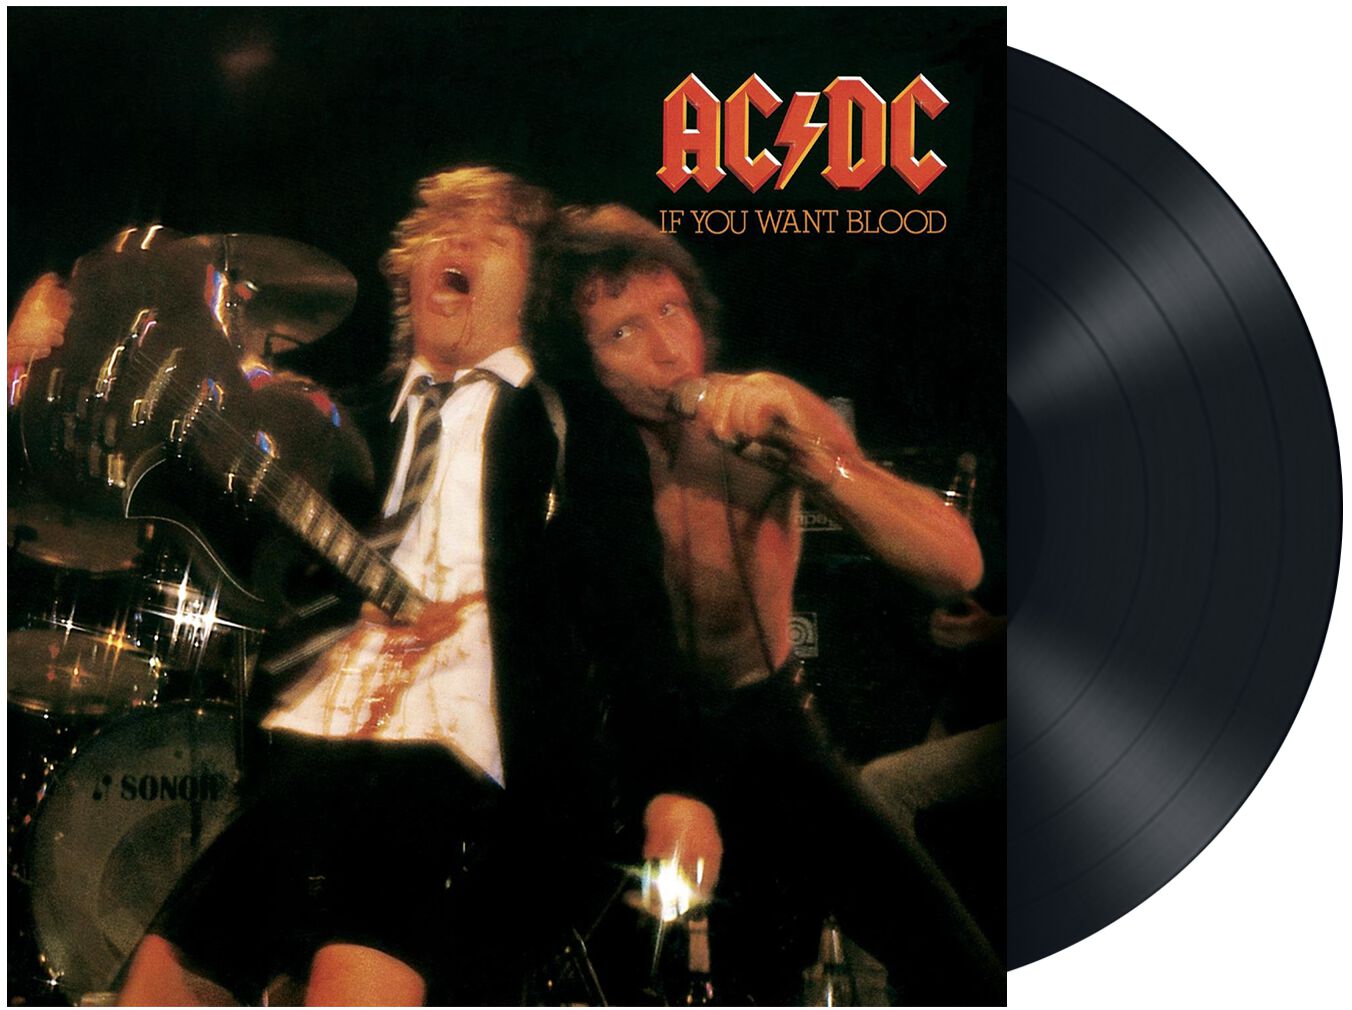 If You Want Blood (You've Got It) - song and lyrics by AC/DC